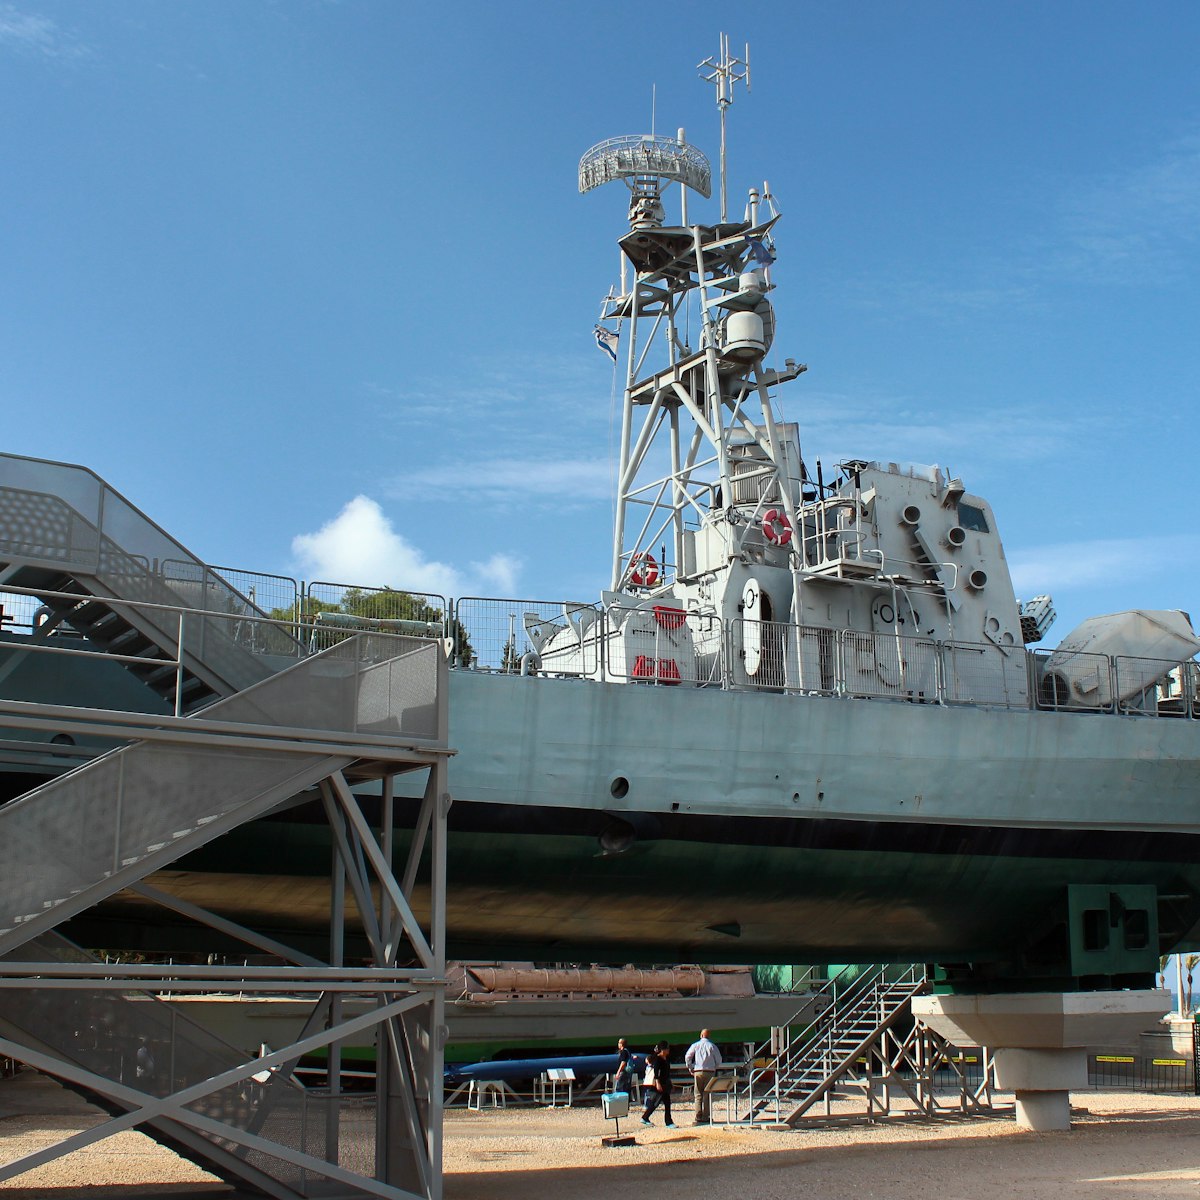 HAIFA, ISRAEL - DECEMBER 4,2013: INS Mivtach, retired ship on permanent display at Clandestine Immigration and Naval Museum at the bottom of Mount Carmel.; Shutterstock ID 612169475